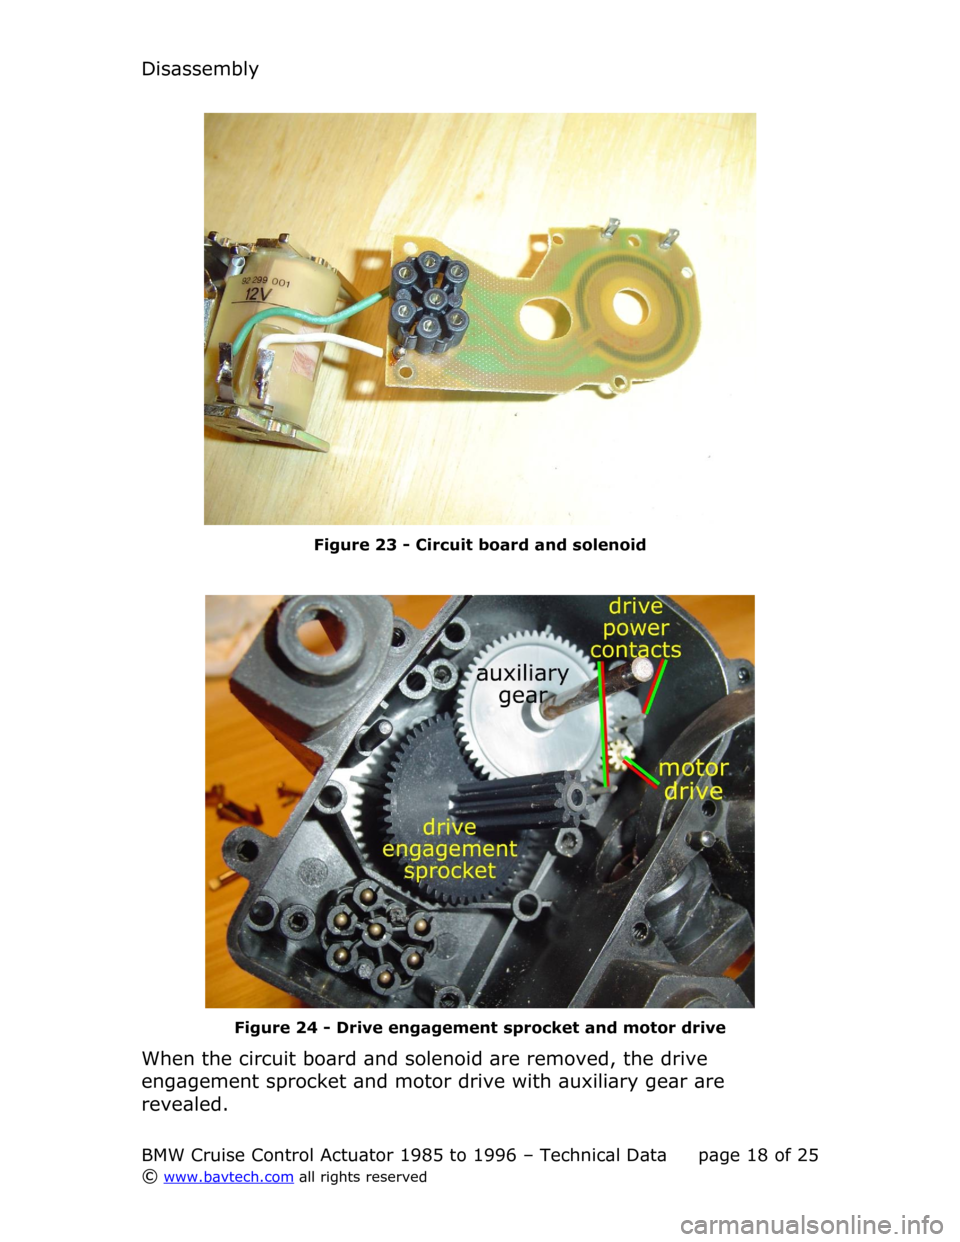 BMW 3 SERIES 1990 E36 Cruise Control Acutator Disassembly
Figure  23  - Circuit board and solenoid
Figure  24  - Drive engagement sprocket and motor drive
When the circuit board and solenoid are removed, the drive  
engagement sprocket and motor 